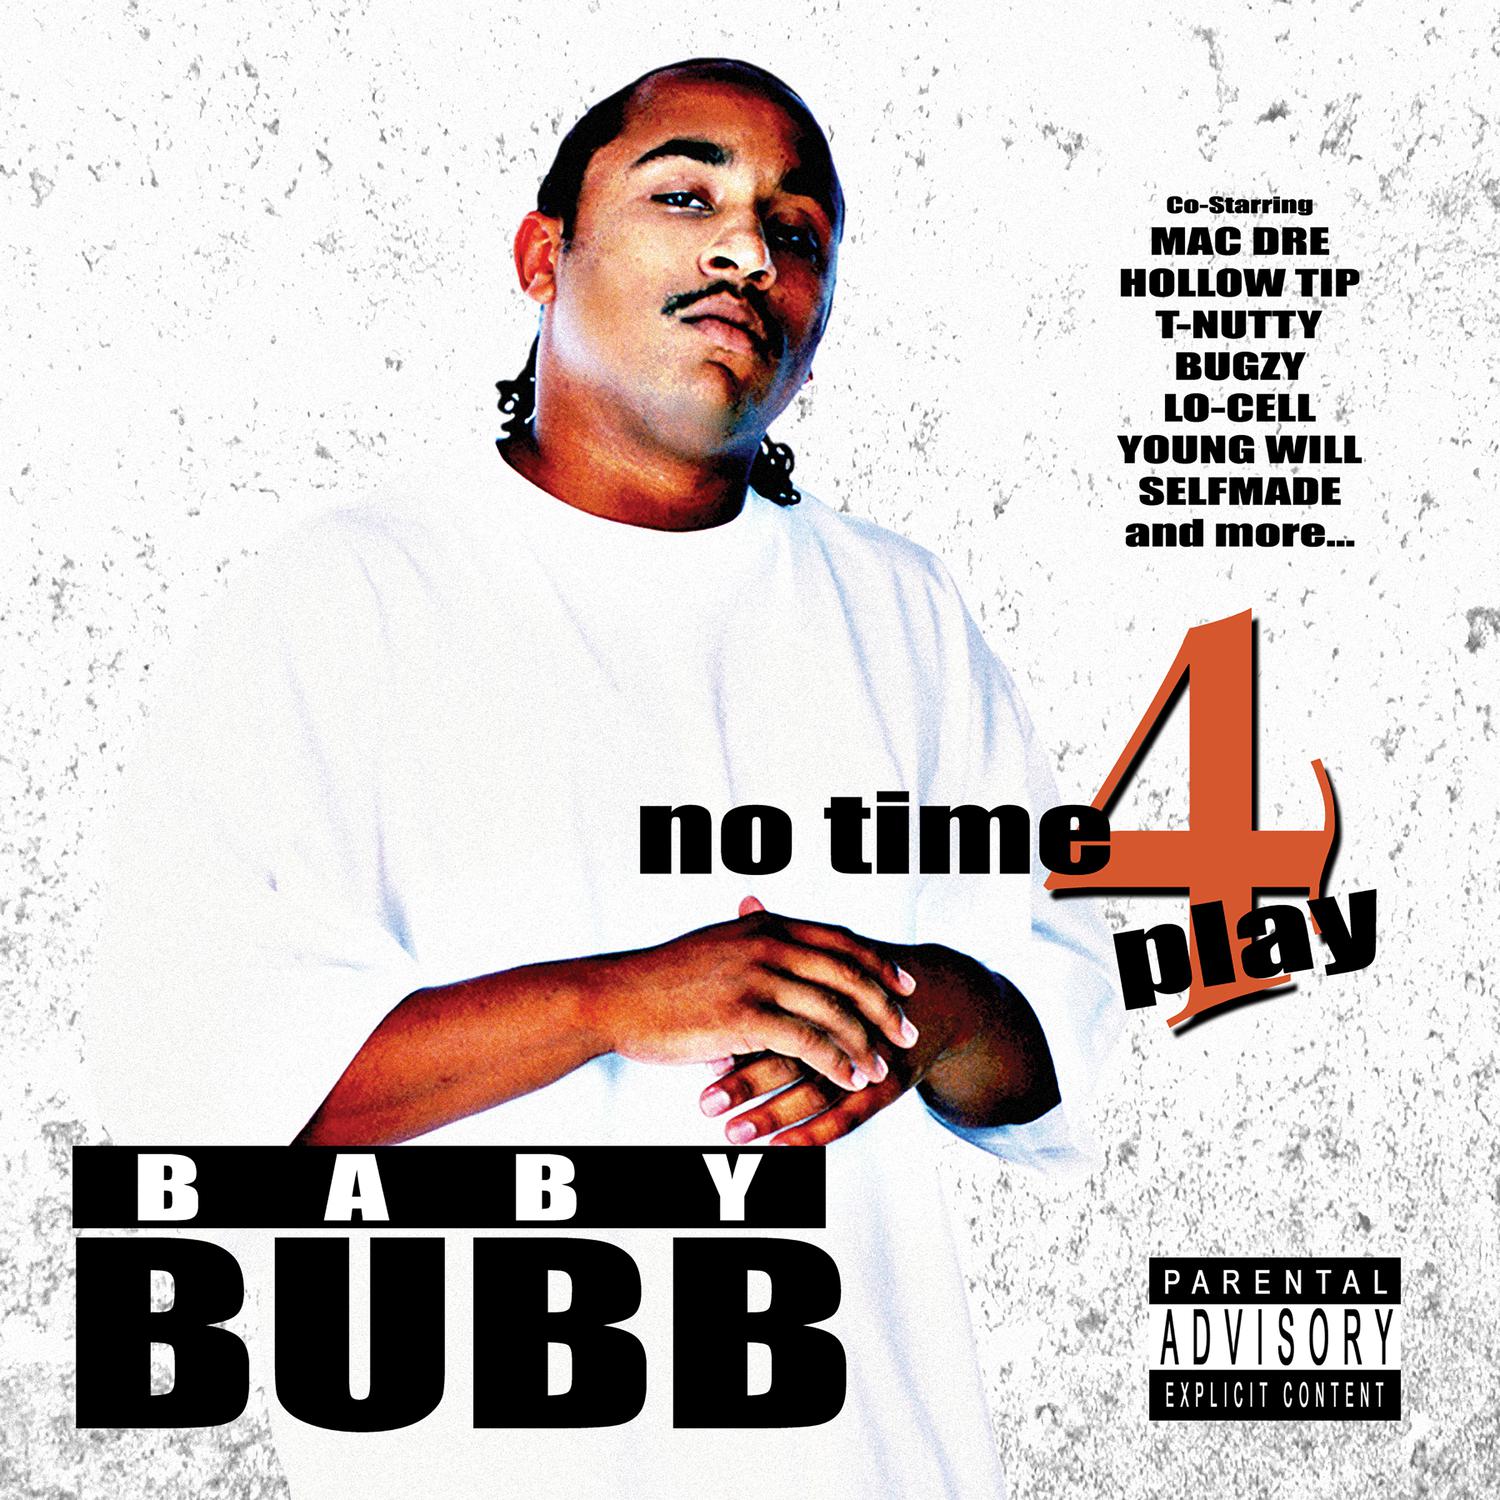 Baby Bubb - No Time 4 Play